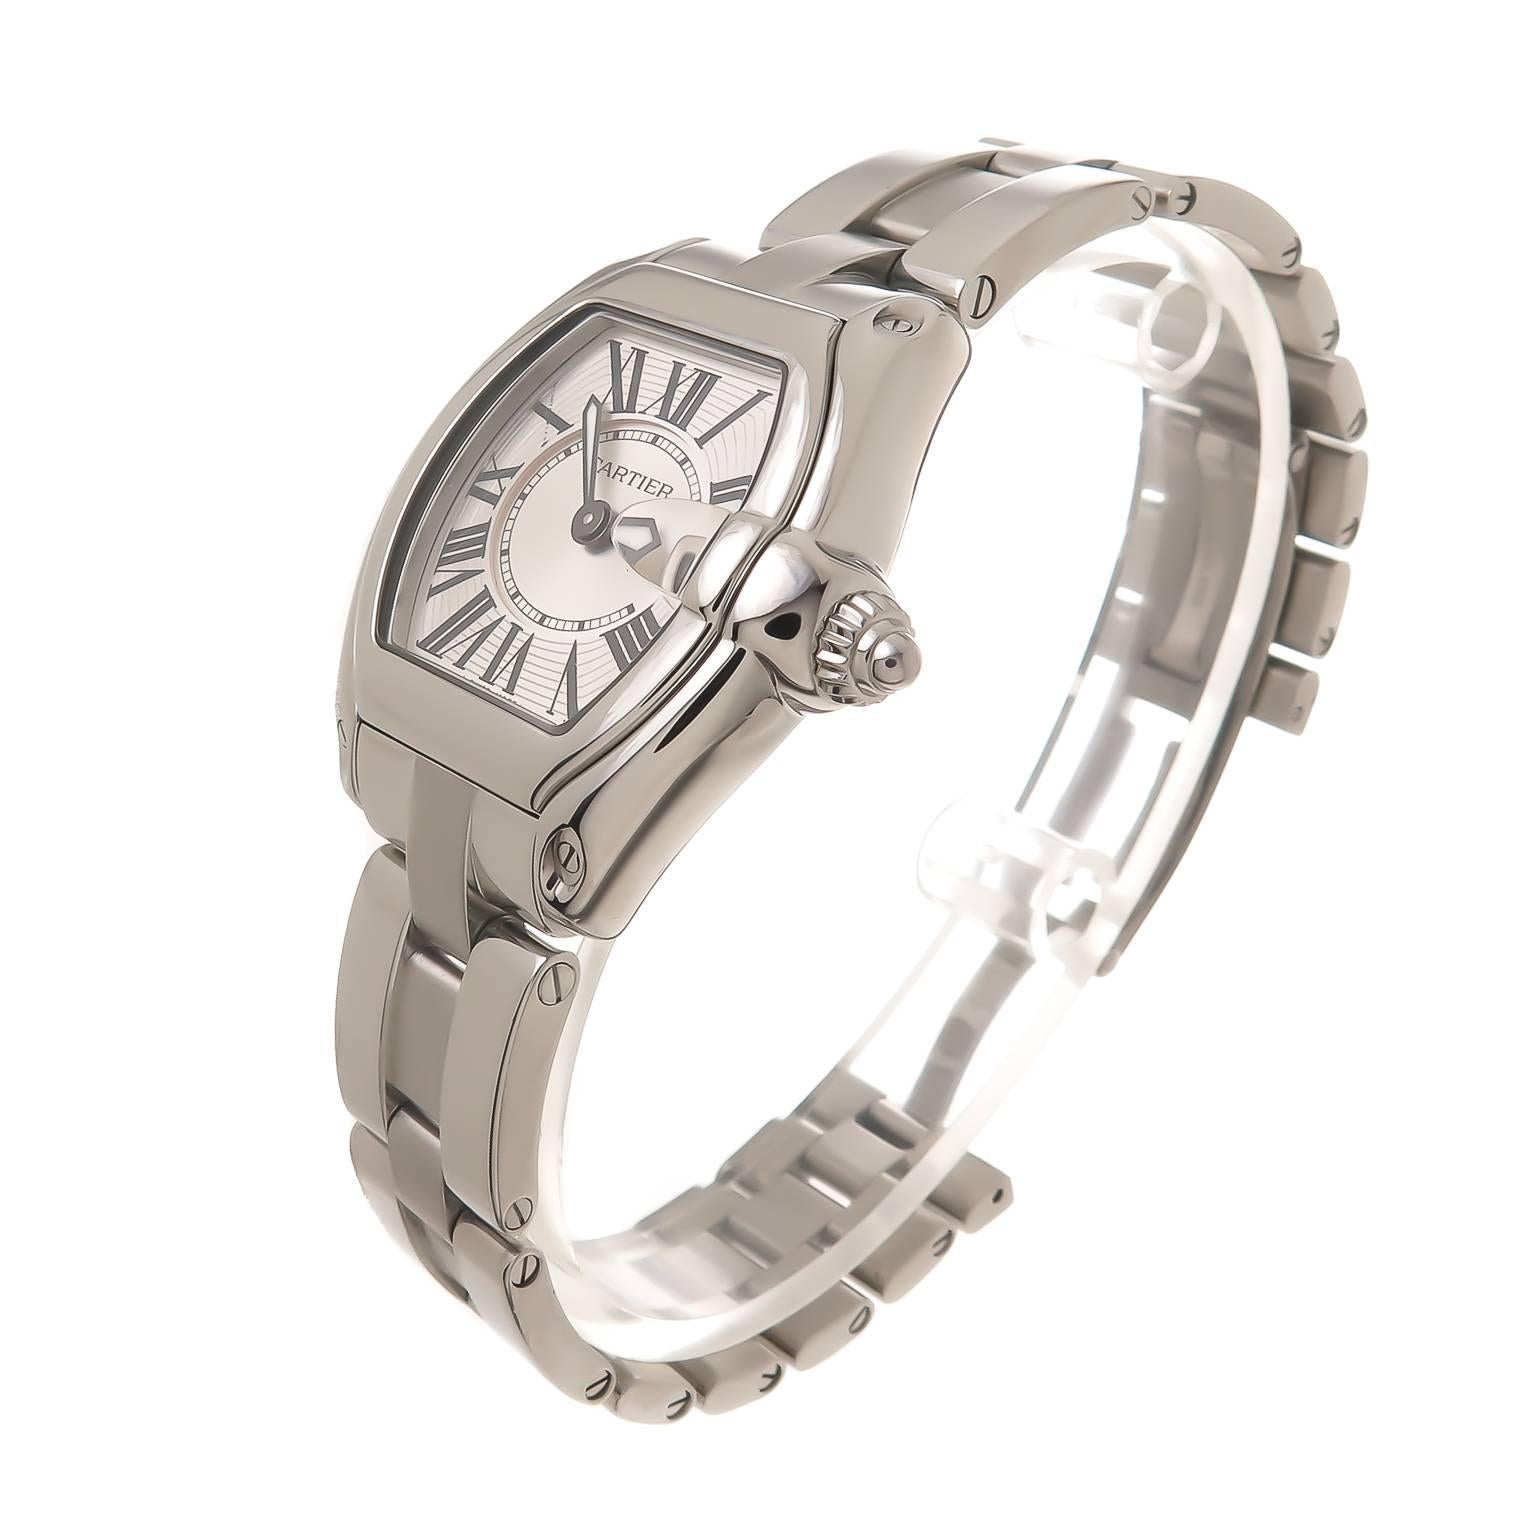 Circa 2013 Cartier Ladies Stainless Steel Roadster Wrist Watch. Ref 2675 31 X 37 MM Water Resistant Case. Quartz Movement, Silvered Guiloche engine turned dial with Black Roman numerals and date window at the 3 position. Scratch resistant crystal.